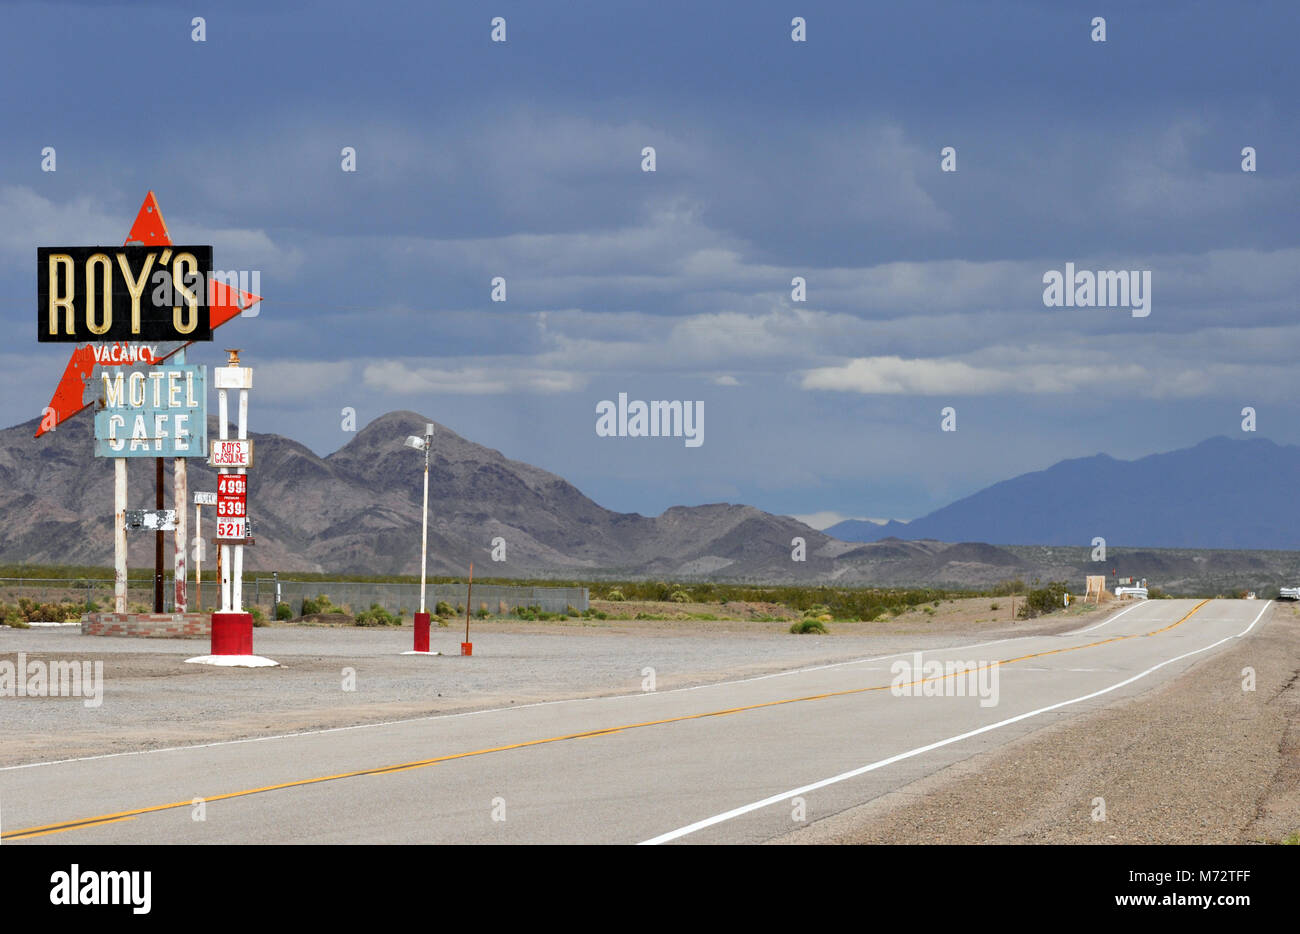 The iconic Roy's Motel and Cafe sign stands under threatening skies along a deserted stretch of Route 66 in Amboy, California. Stock Photo